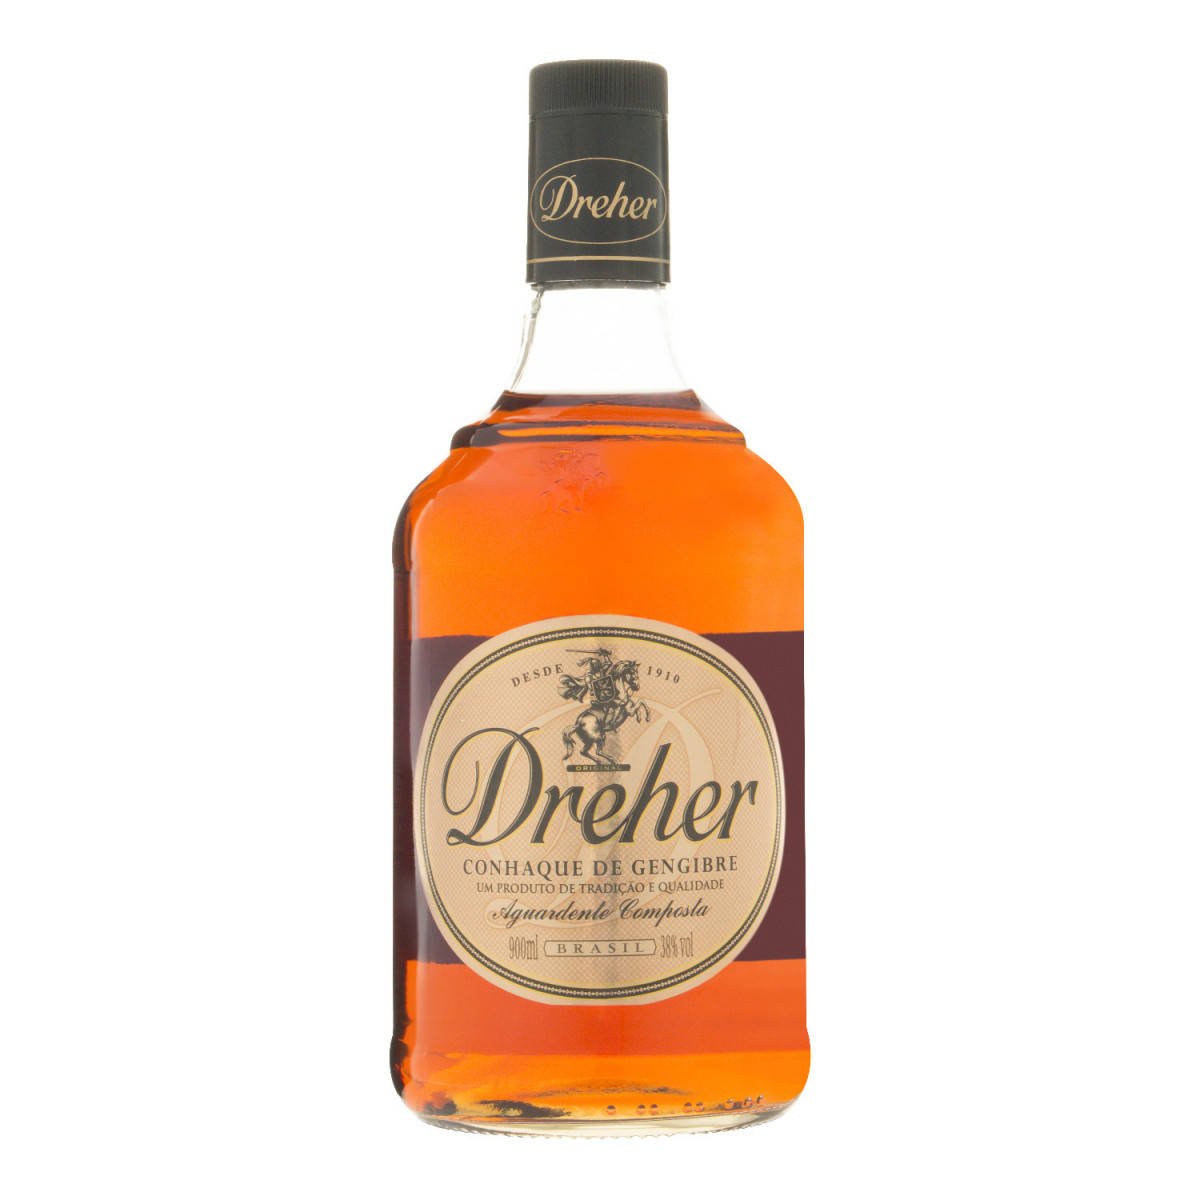 Dreher Cognac From Brazil Picture